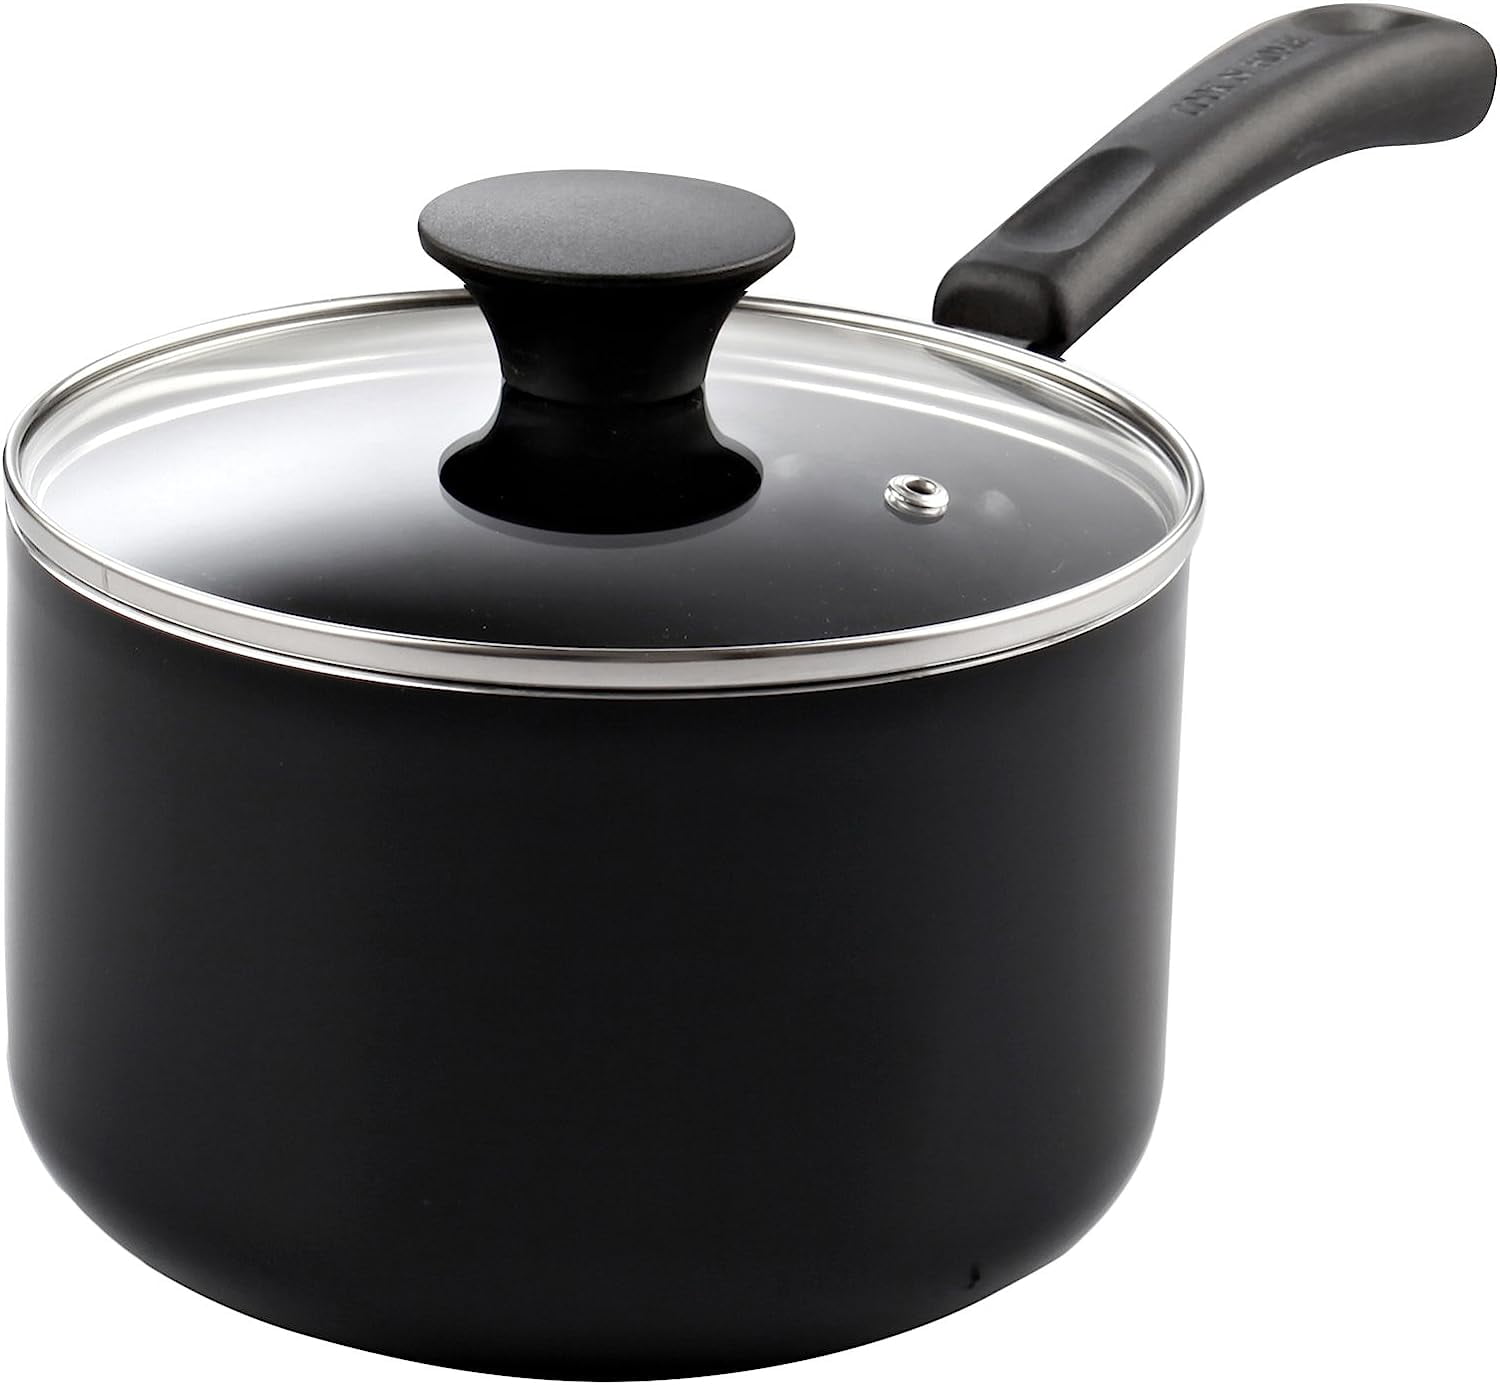 Farberware Classic Series 3 qt. Stainless Steel Nonstick Sauce Pan with Lid  50003 - The Home Depot